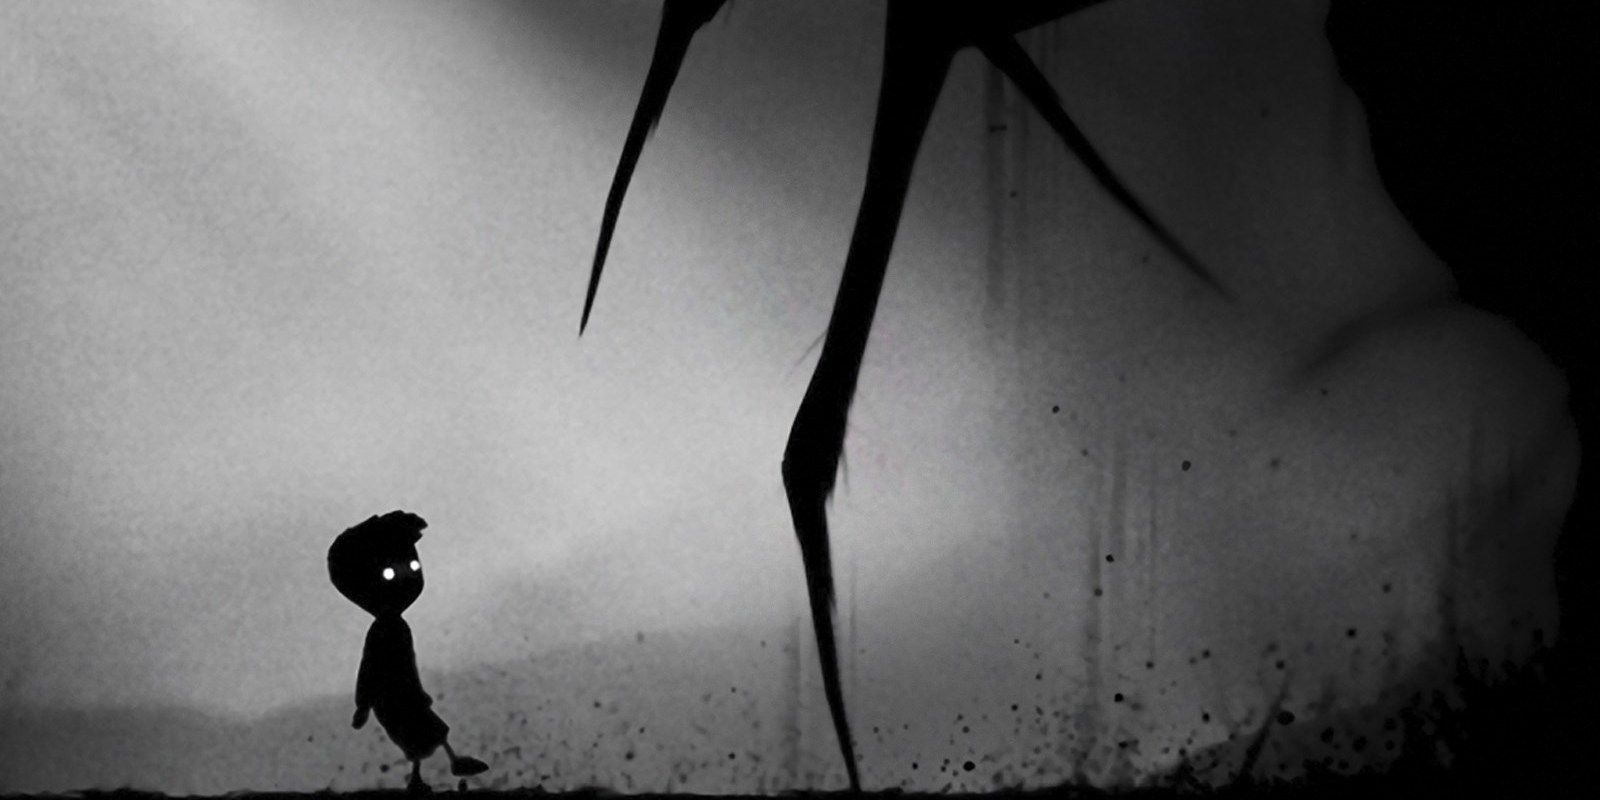 The boy and spider from Limbo